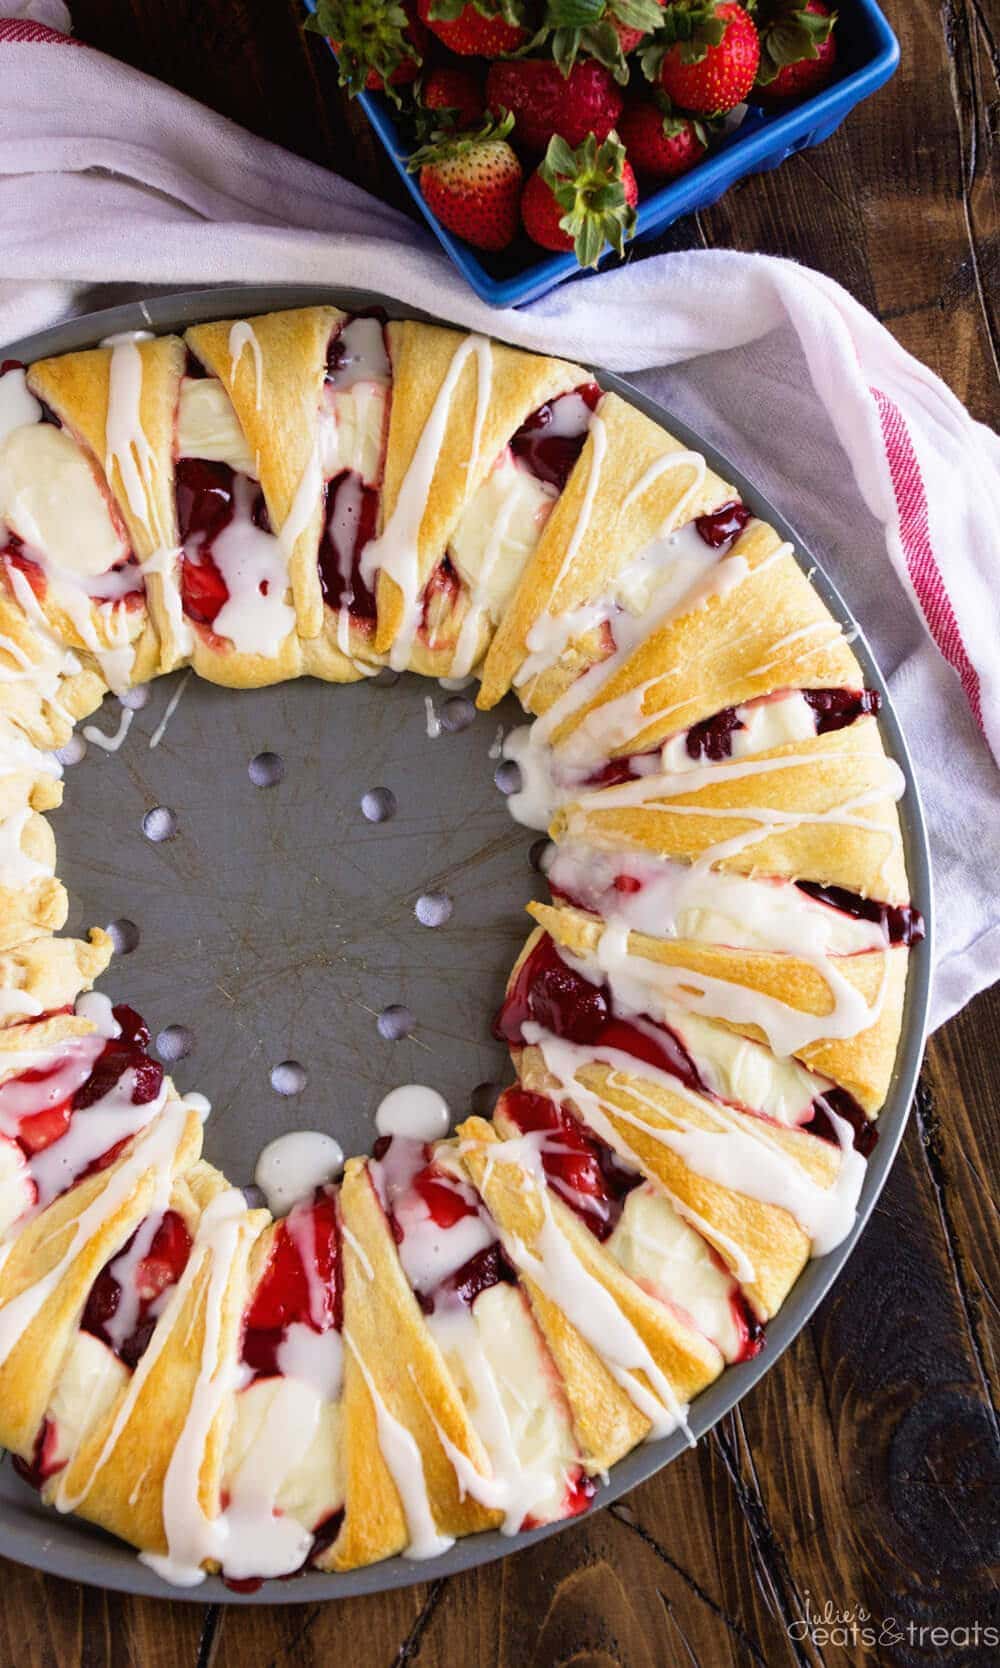 Strawberry Cheesecake Crescent Ring ~ Tender, Flaky Crescent Rolls Stuffed with Strawberry Pie Filling & Cheesecake then Drizzled with Icing! Perfect Quick & Easy Breakfast Recipe!